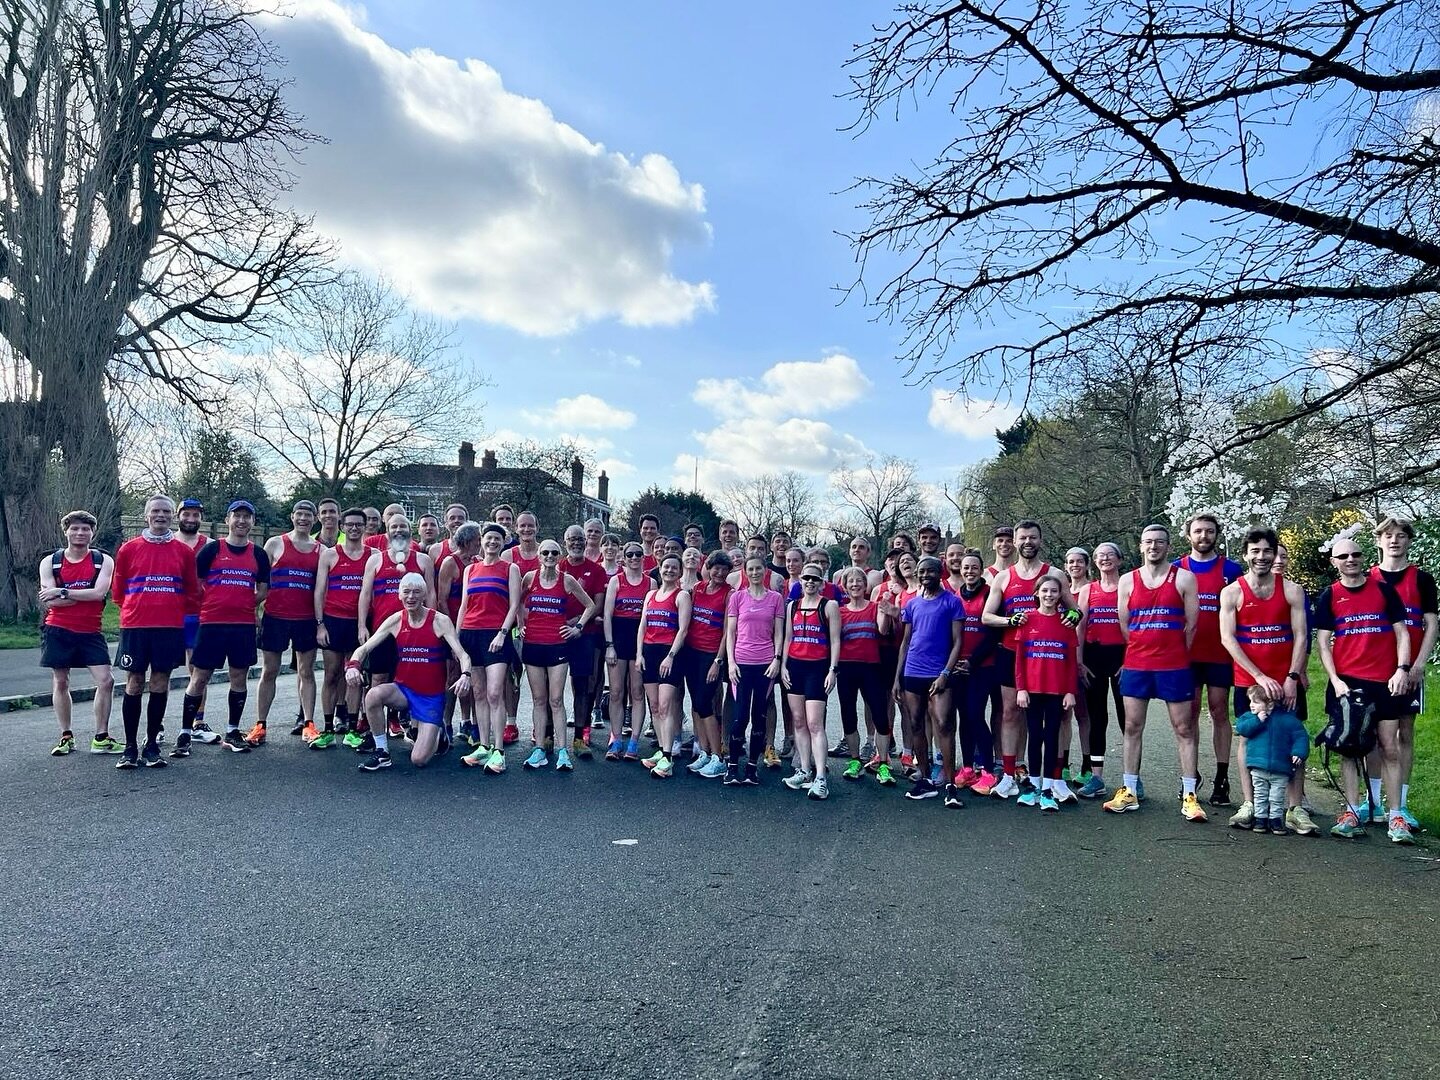 Dulwich Runners do Dulwich Parkrun! Over 70 members and family ran, jogged and walked the course today as art of our annual club championships #dulwich #dulwichparkrun